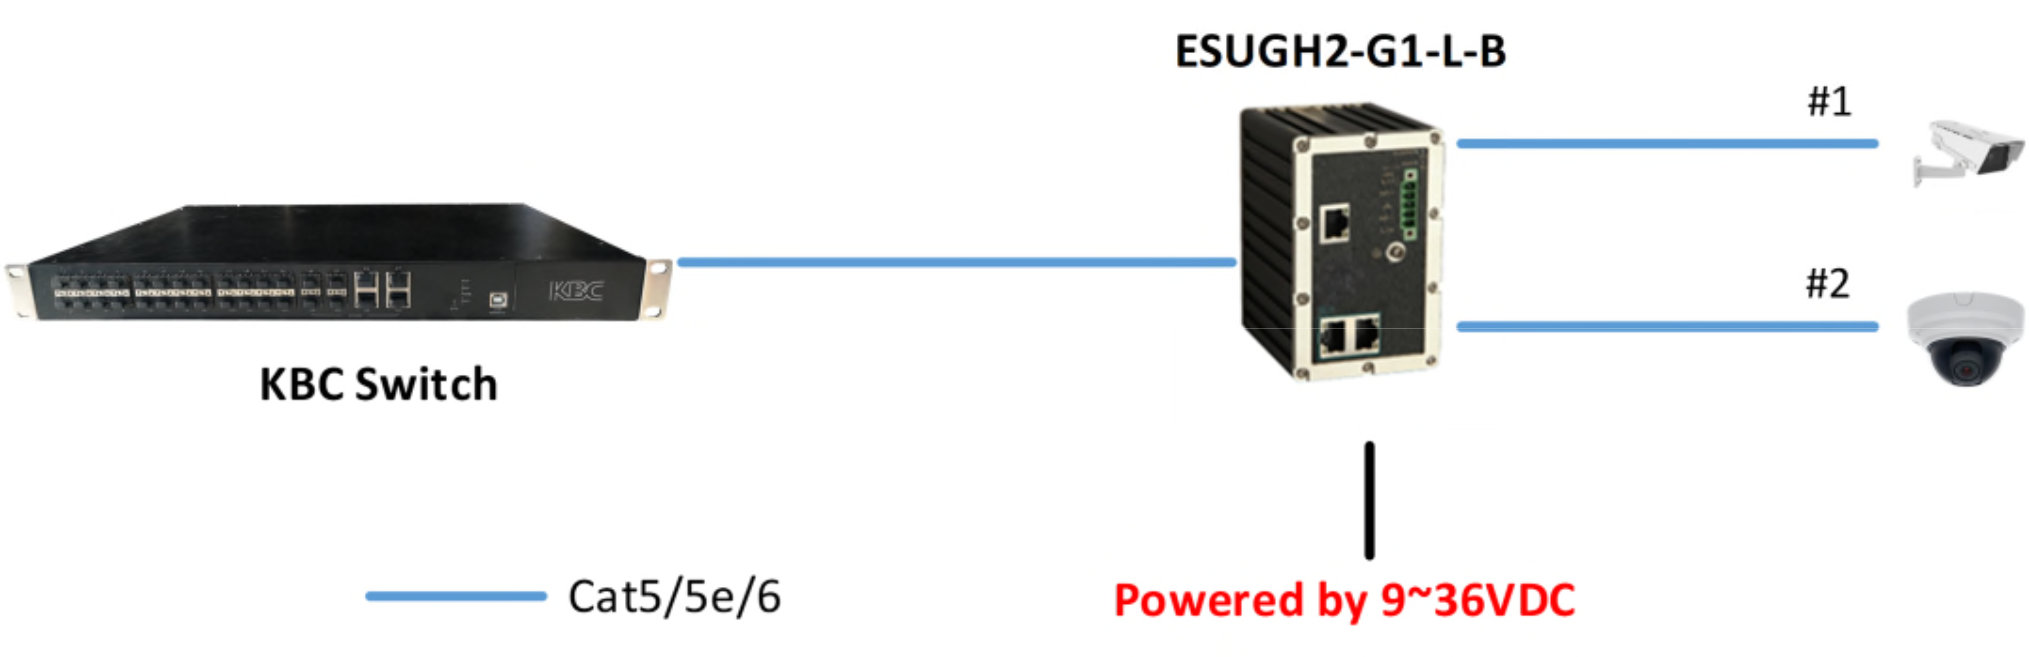 Typical System configuration for esugh2-g1-l